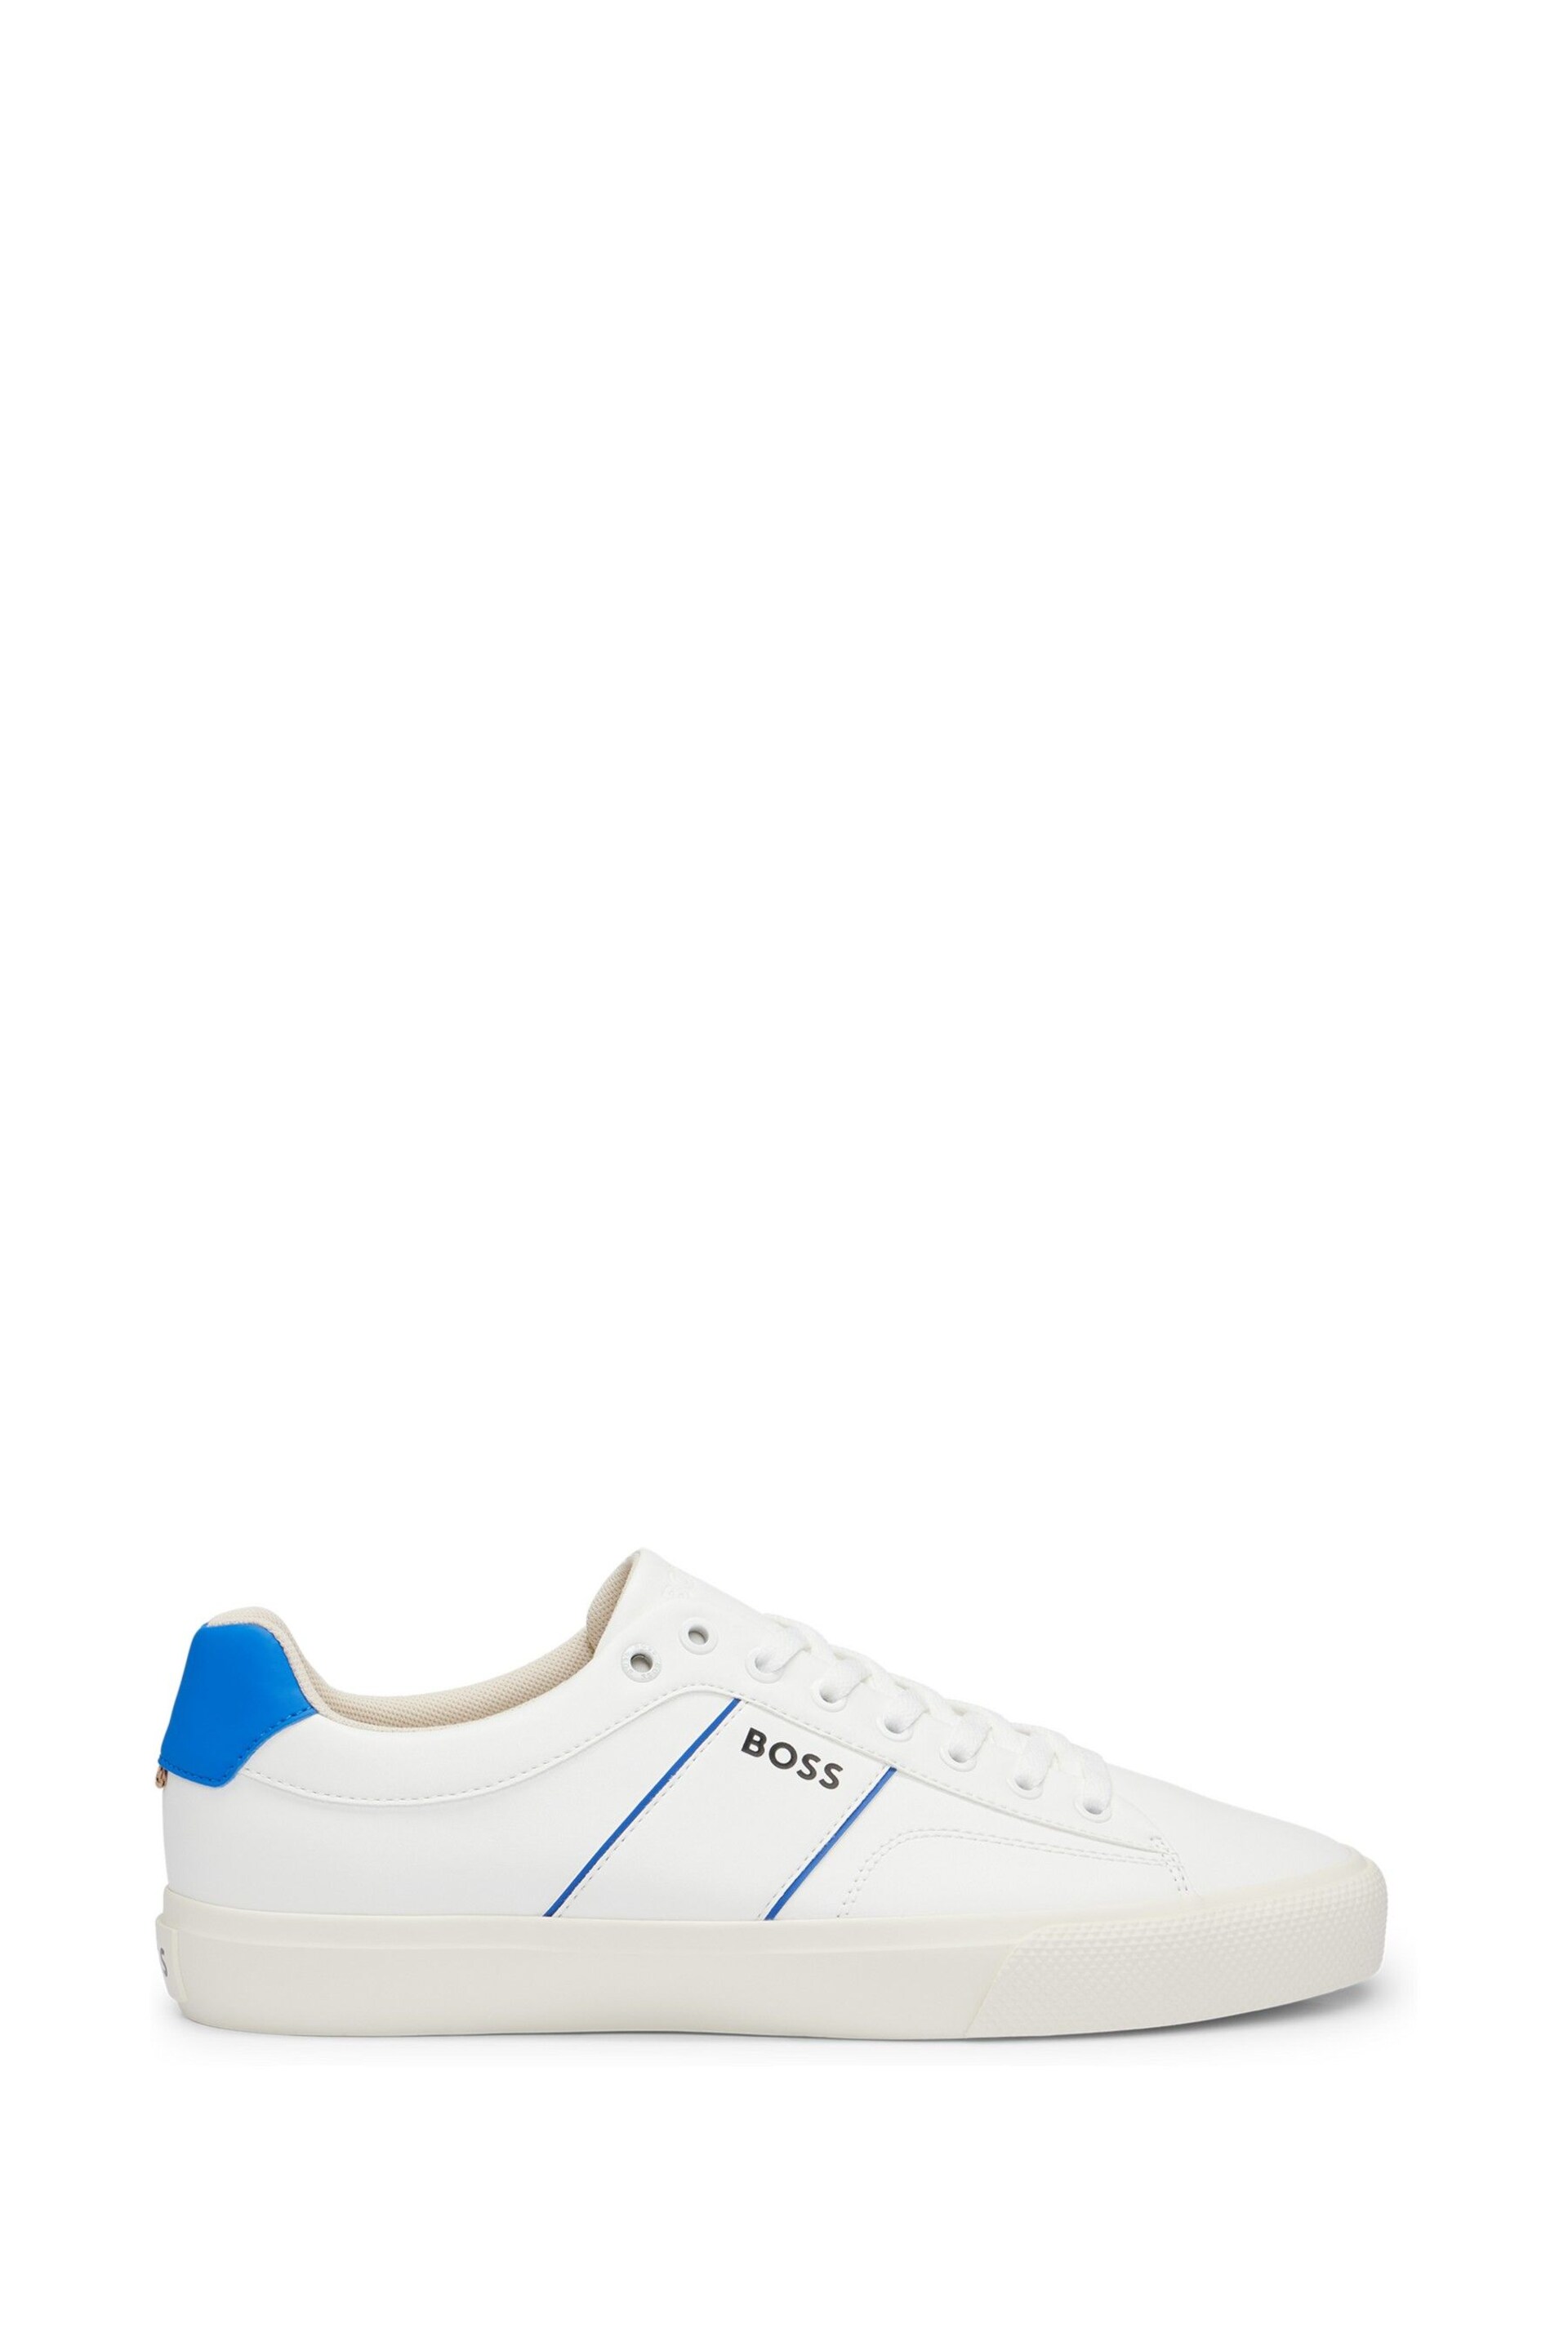 BOSS White Cupsole Lace-Up Trainers With Contrast Logo - Image 2 of 5